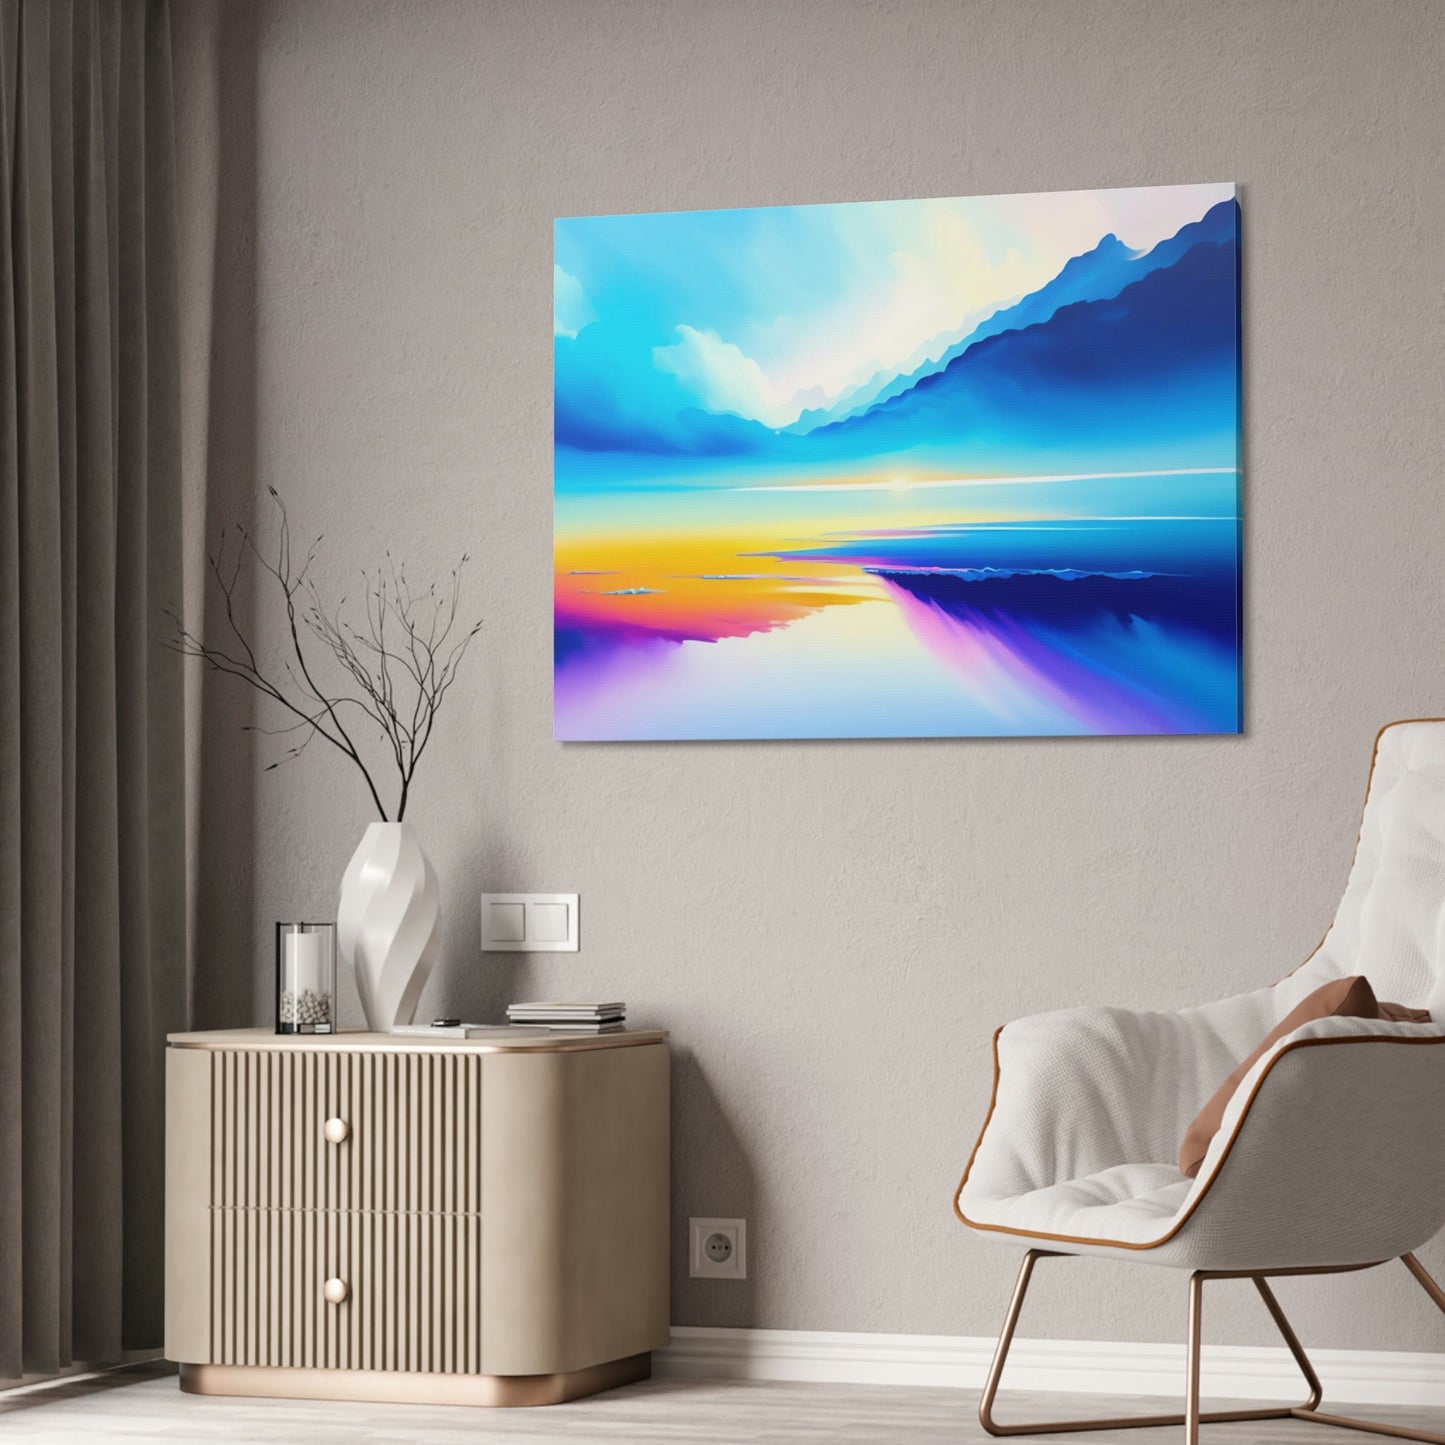 Nature's Wonder: Wall Art of a Breathtaking Lakeside on Natural Canvas & Poster